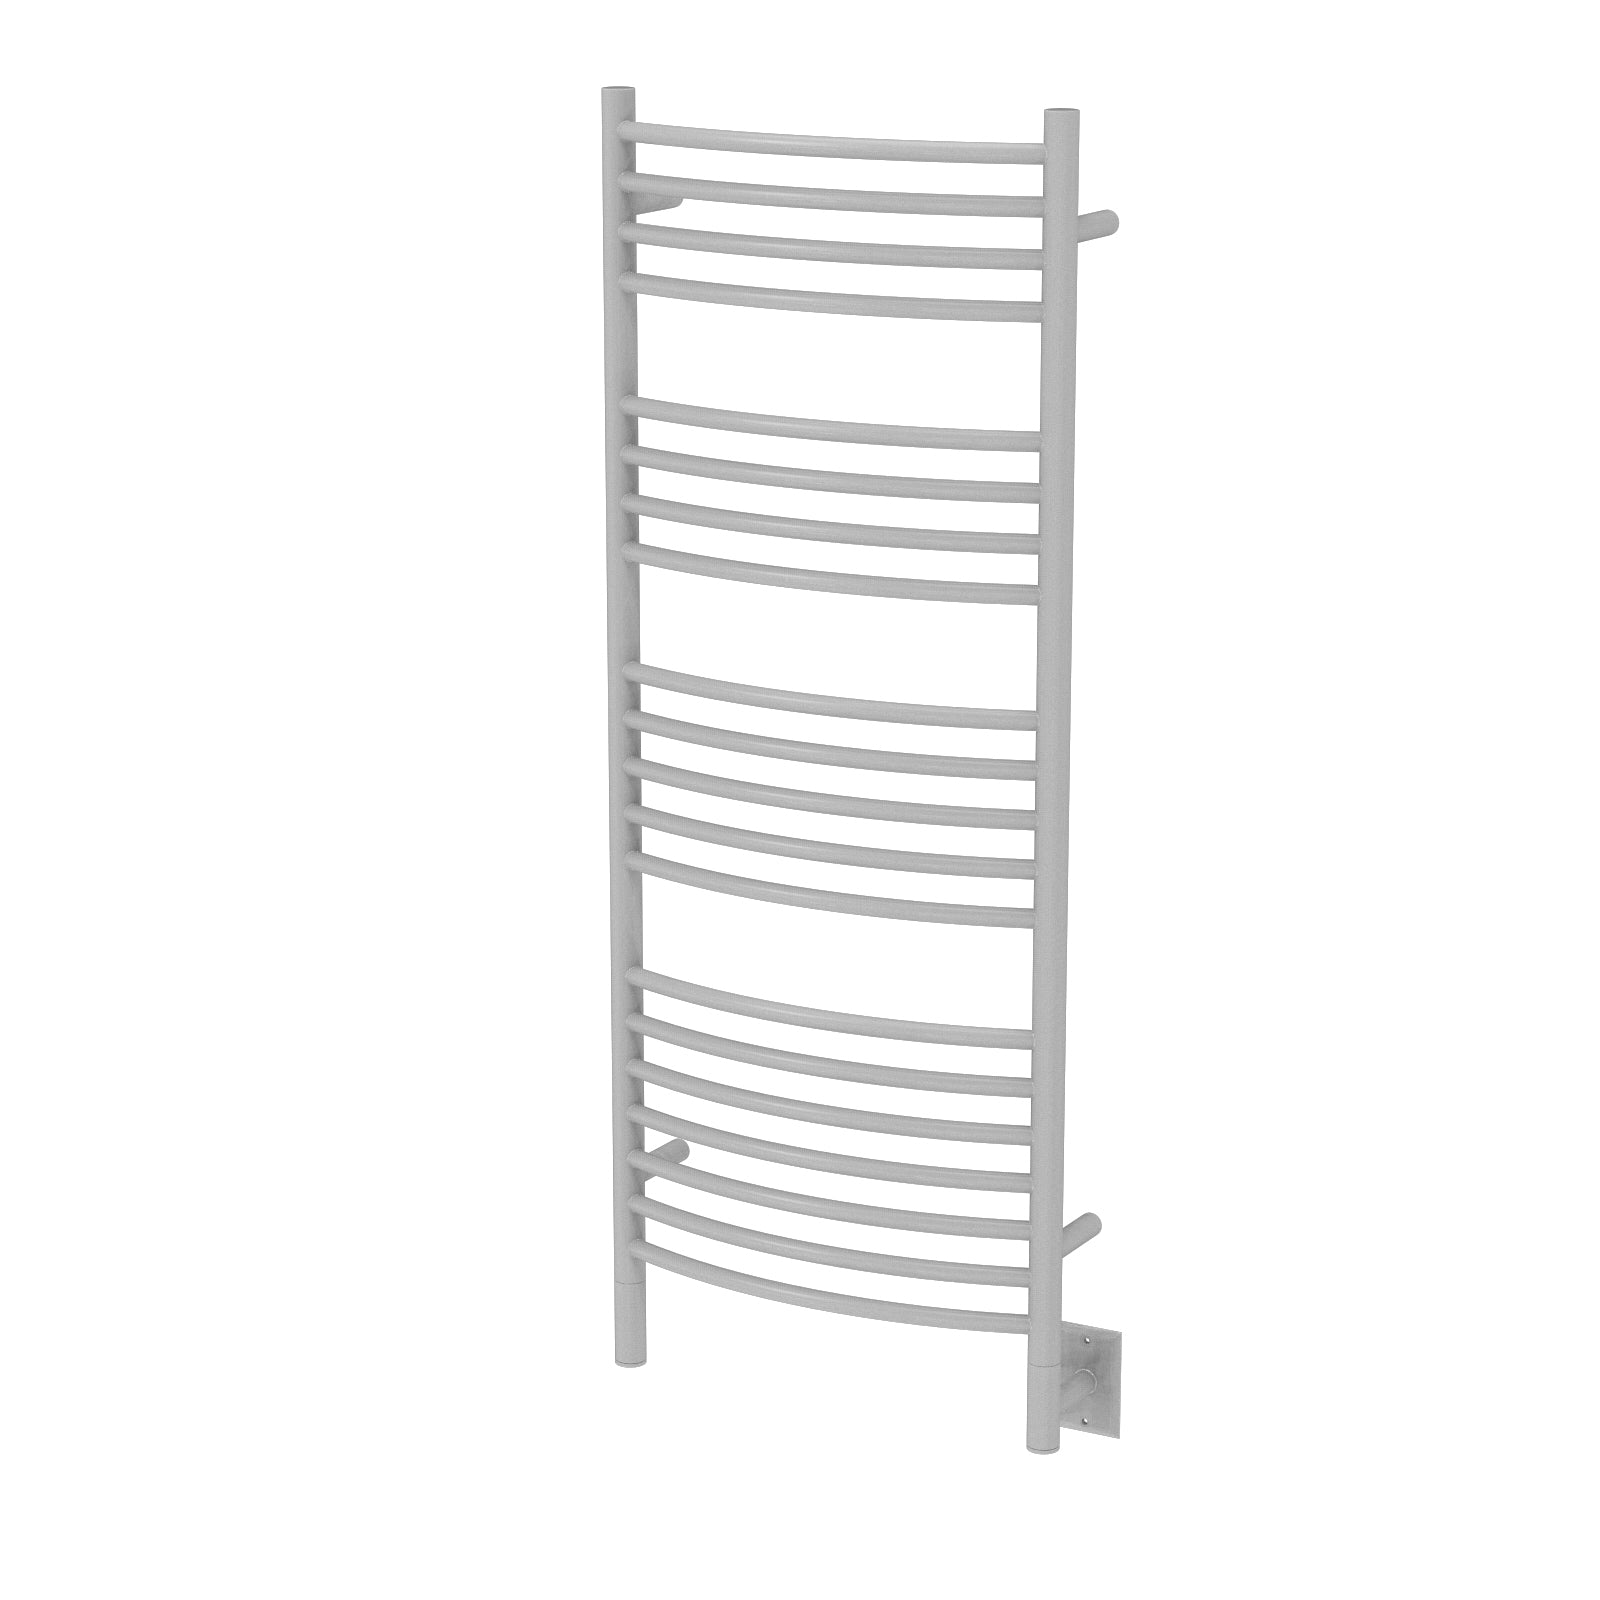 Amba Jeeves Model D Curved 20 Bar Hardwired Towel Warmer